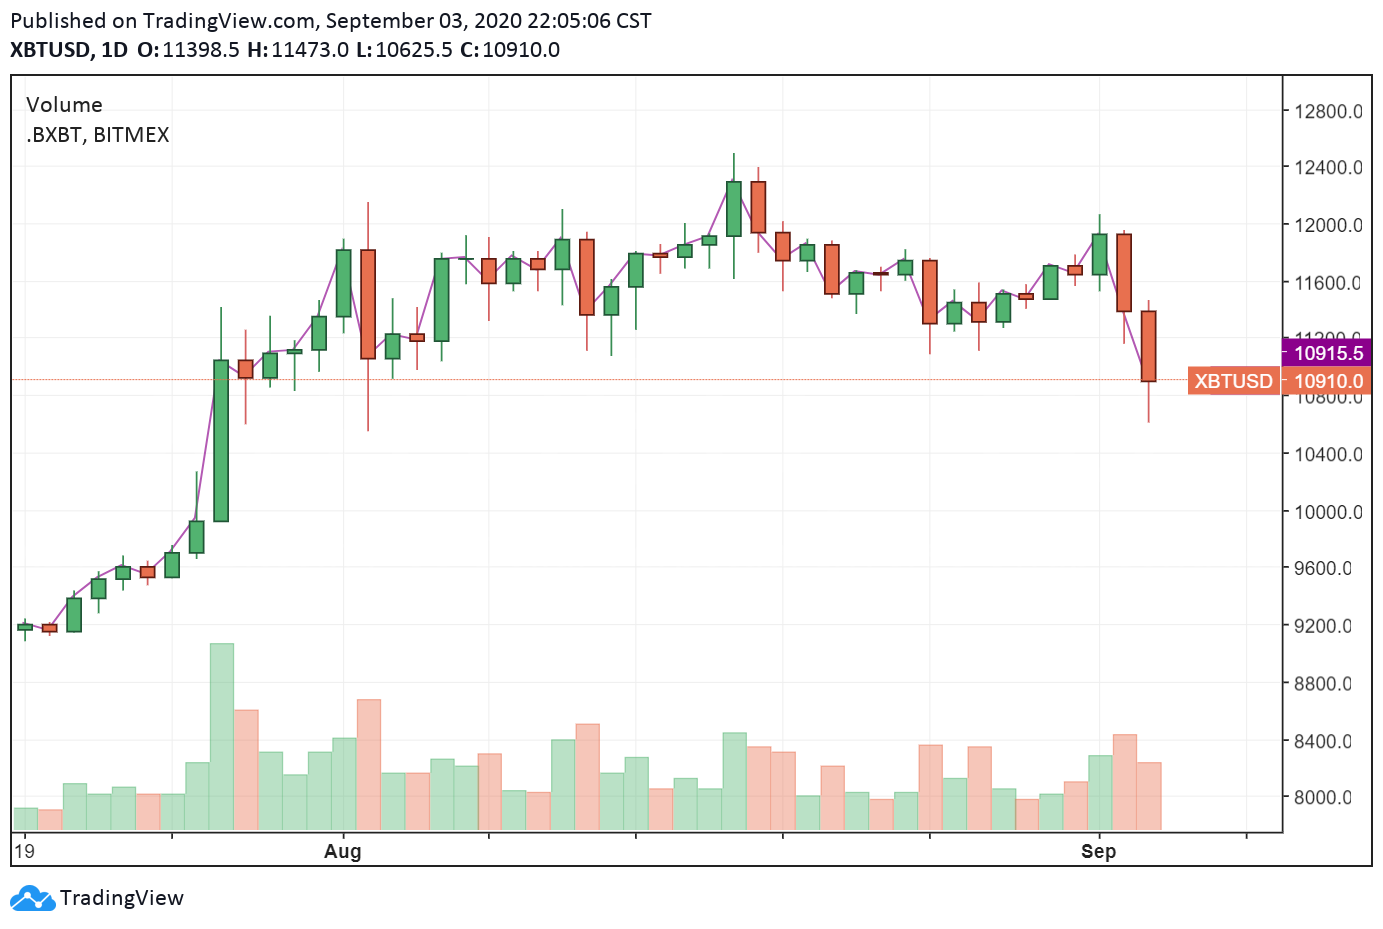 The daily price chart of Bitcoin. Source: TradingView.com